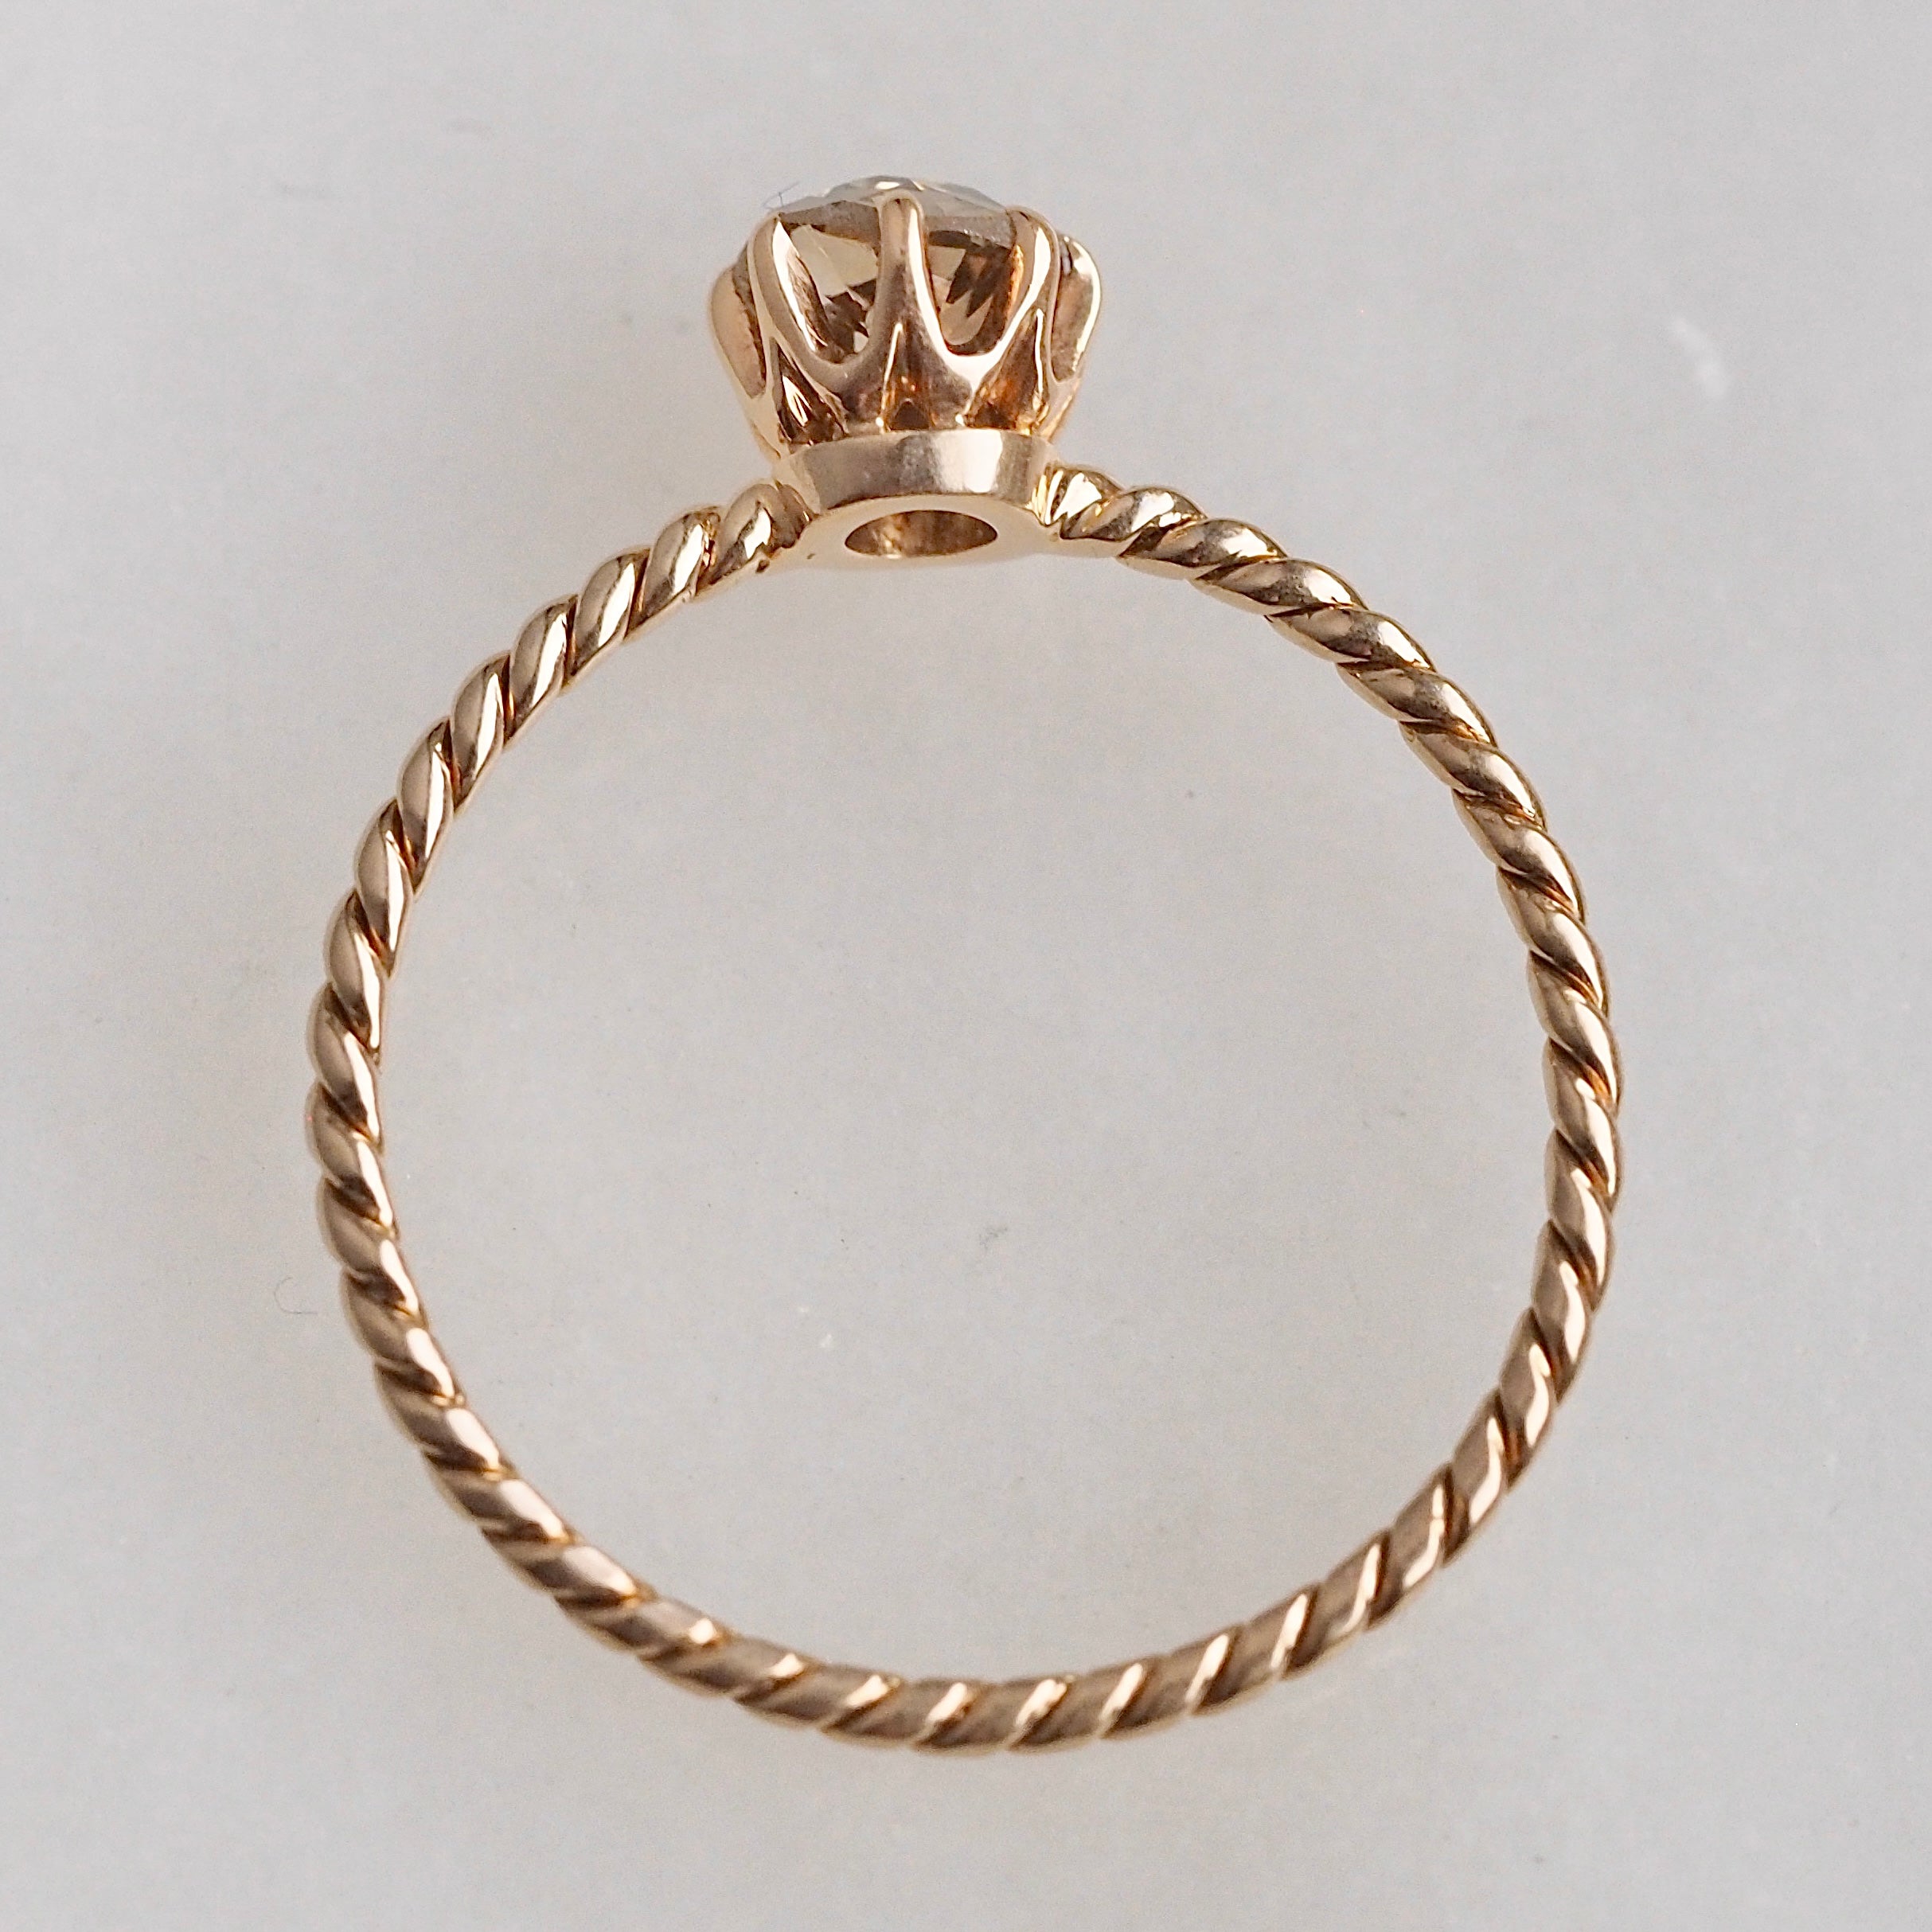 Antique 14k Gold Old Mine Cut Diamond Ring with Twisted Band